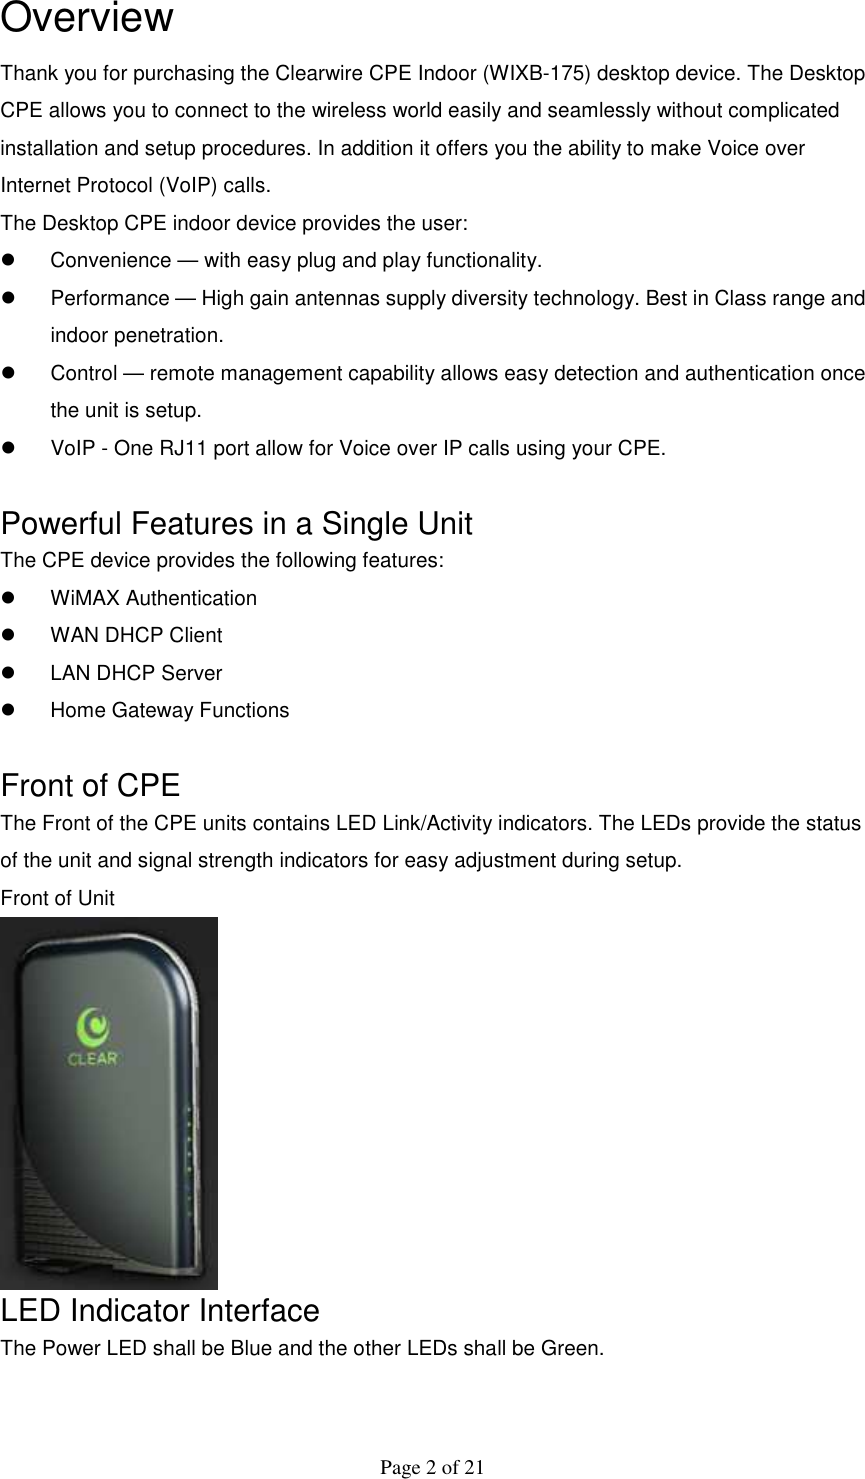  Page 2 of 21 Overview Thank you for purchasing the Clearwire CPE Indoor (WIXB-175) desktop device. The Desktop CPE allows you to connect to the wireless world easily and seamlessly without complicated installation and setup procedures. In addition it offers you the ability to make Voice over Internet Protocol (VoIP) calls. The Desktop CPE indoor device provides the user:   Convenience — with easy plug and play functionality.   Performance — High gain antennas supply diversity technology. Best in Class range and indoor penetration.   Control — remote management capability allows easy detection and authentication once the unit is setup.   VoIP - One RJ11 port allow for Voice over IP calls using your CPE.  Powerful Features in a Single Unit The CPE device provides the following features:   WiMAX Authentication   WAN DHCP Client   LAN DHCP Server   Home Gateway Functions  Front of CPE The Front of the CPE units contains LED Link/Activity indicators. The LEDs provide the status of the unit and signal strength indicators for easy adjustment during setup. Front of Unit  LED Indicator Interface The Power LED shall be Blue and the other LEDs shall be Green. 